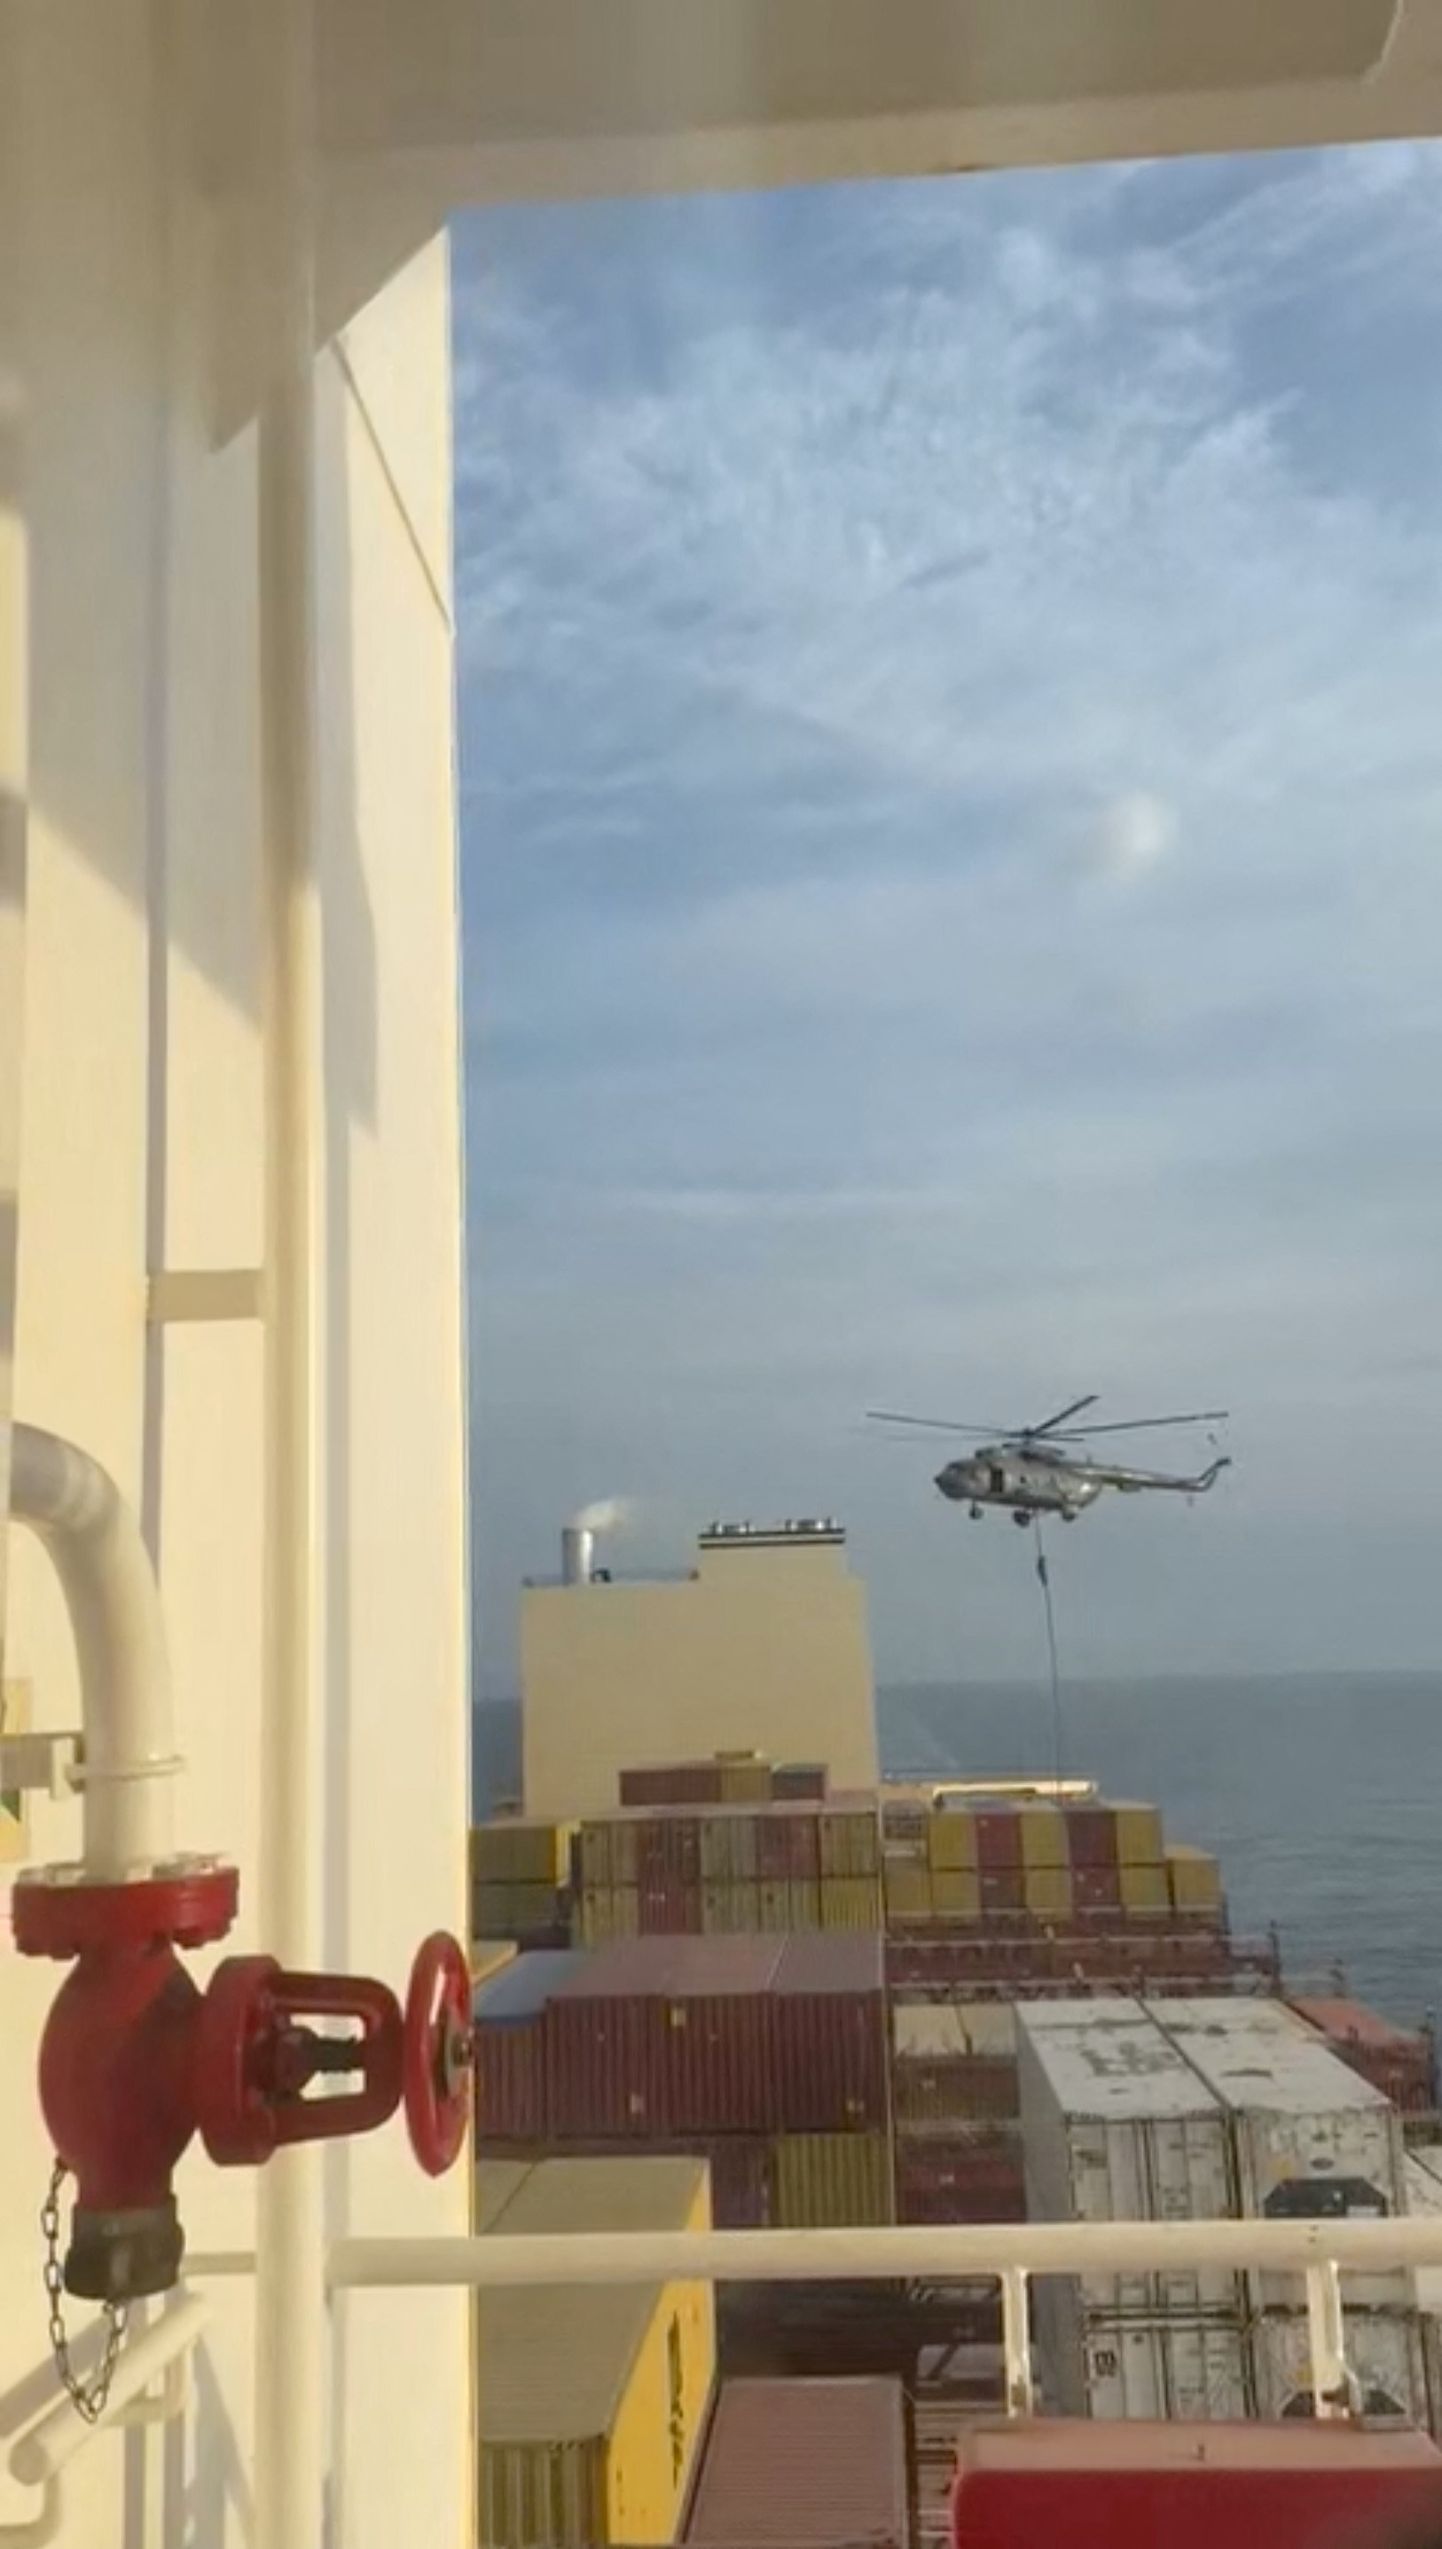 An official slides down a rope during a helicopter raid on MSC Aries ship at sea in this screen grab obtained from a social media video released on April 13, 2024.